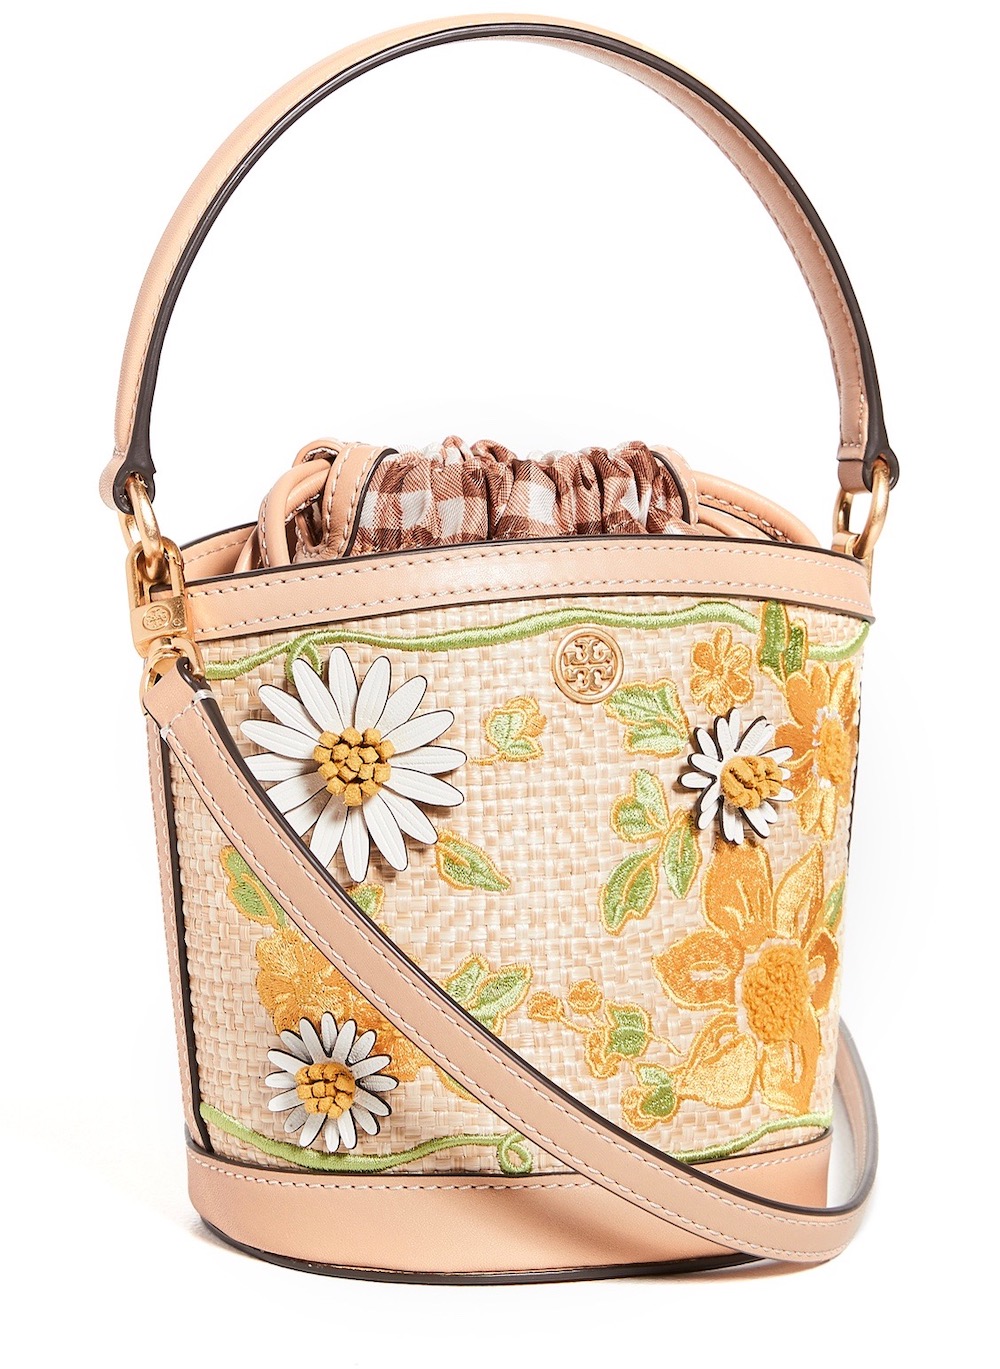 Floral Bags 2021 Update #11